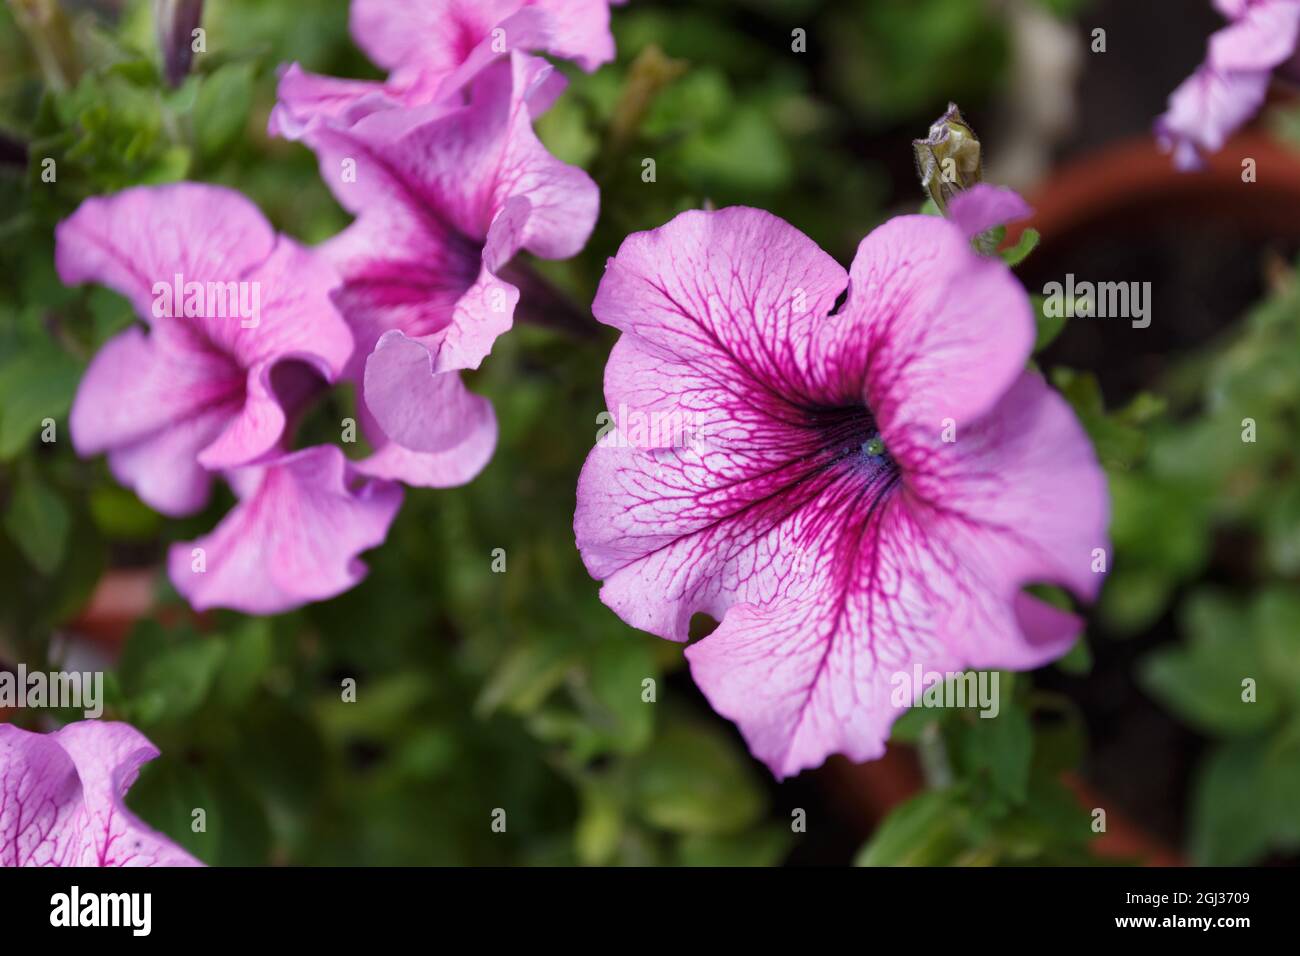 Pink petunia flowers in the garden close up Stock Photo